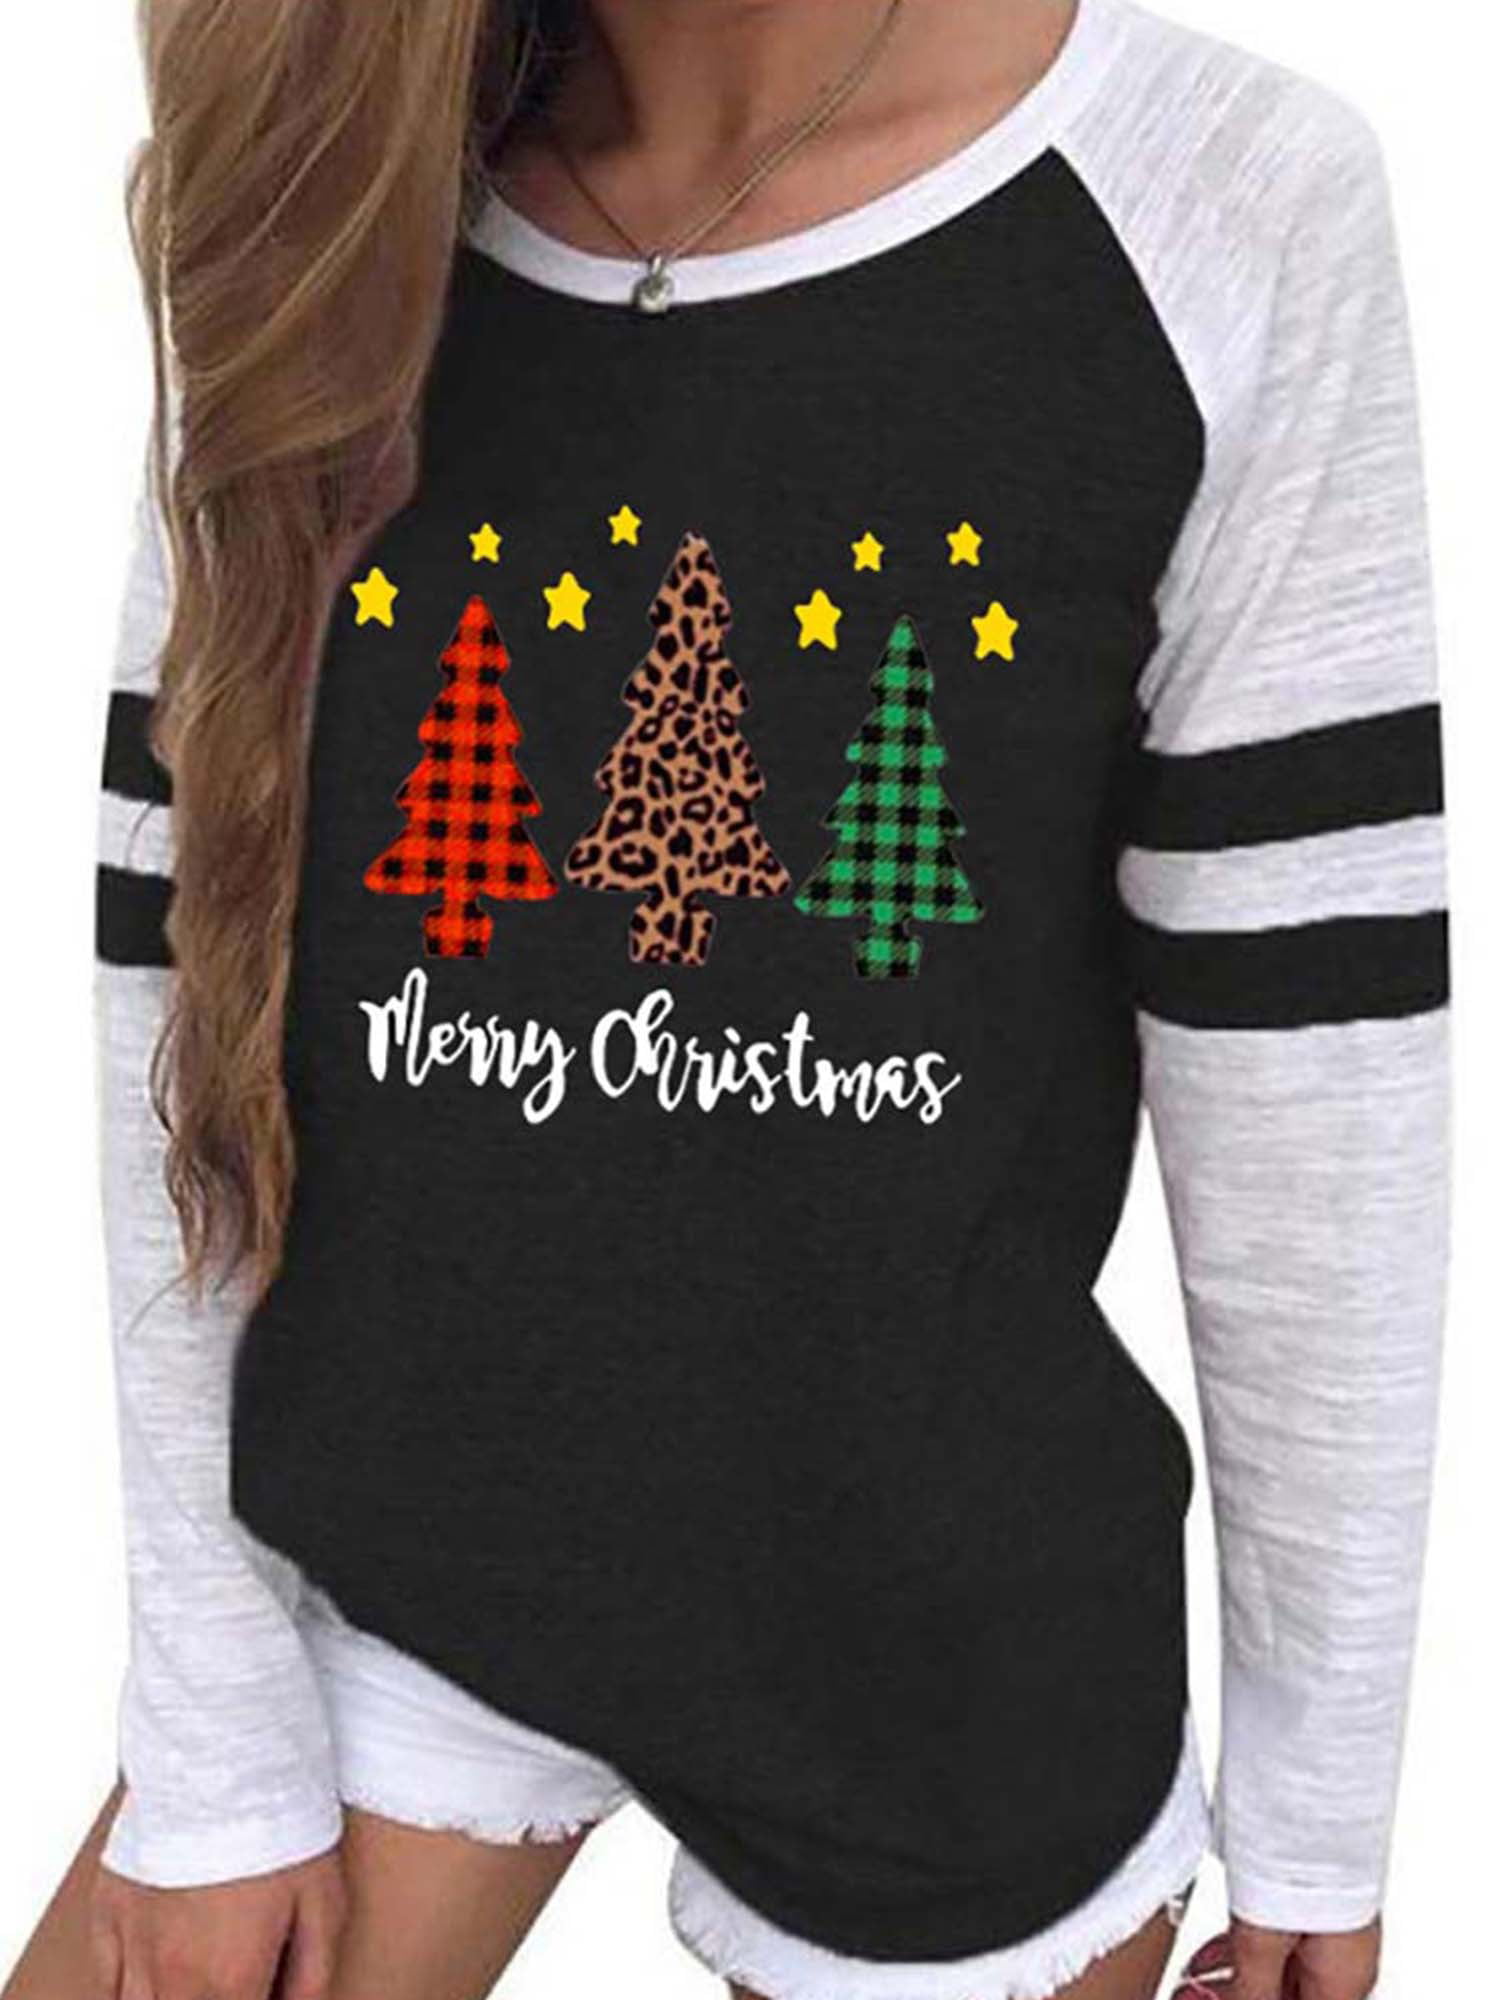 Womens Christmas Reindeer Sequin Sweatshirt Loose Oversized Baggy Fitting Shirts Casual Batwing Sleeve Pullover Tops 